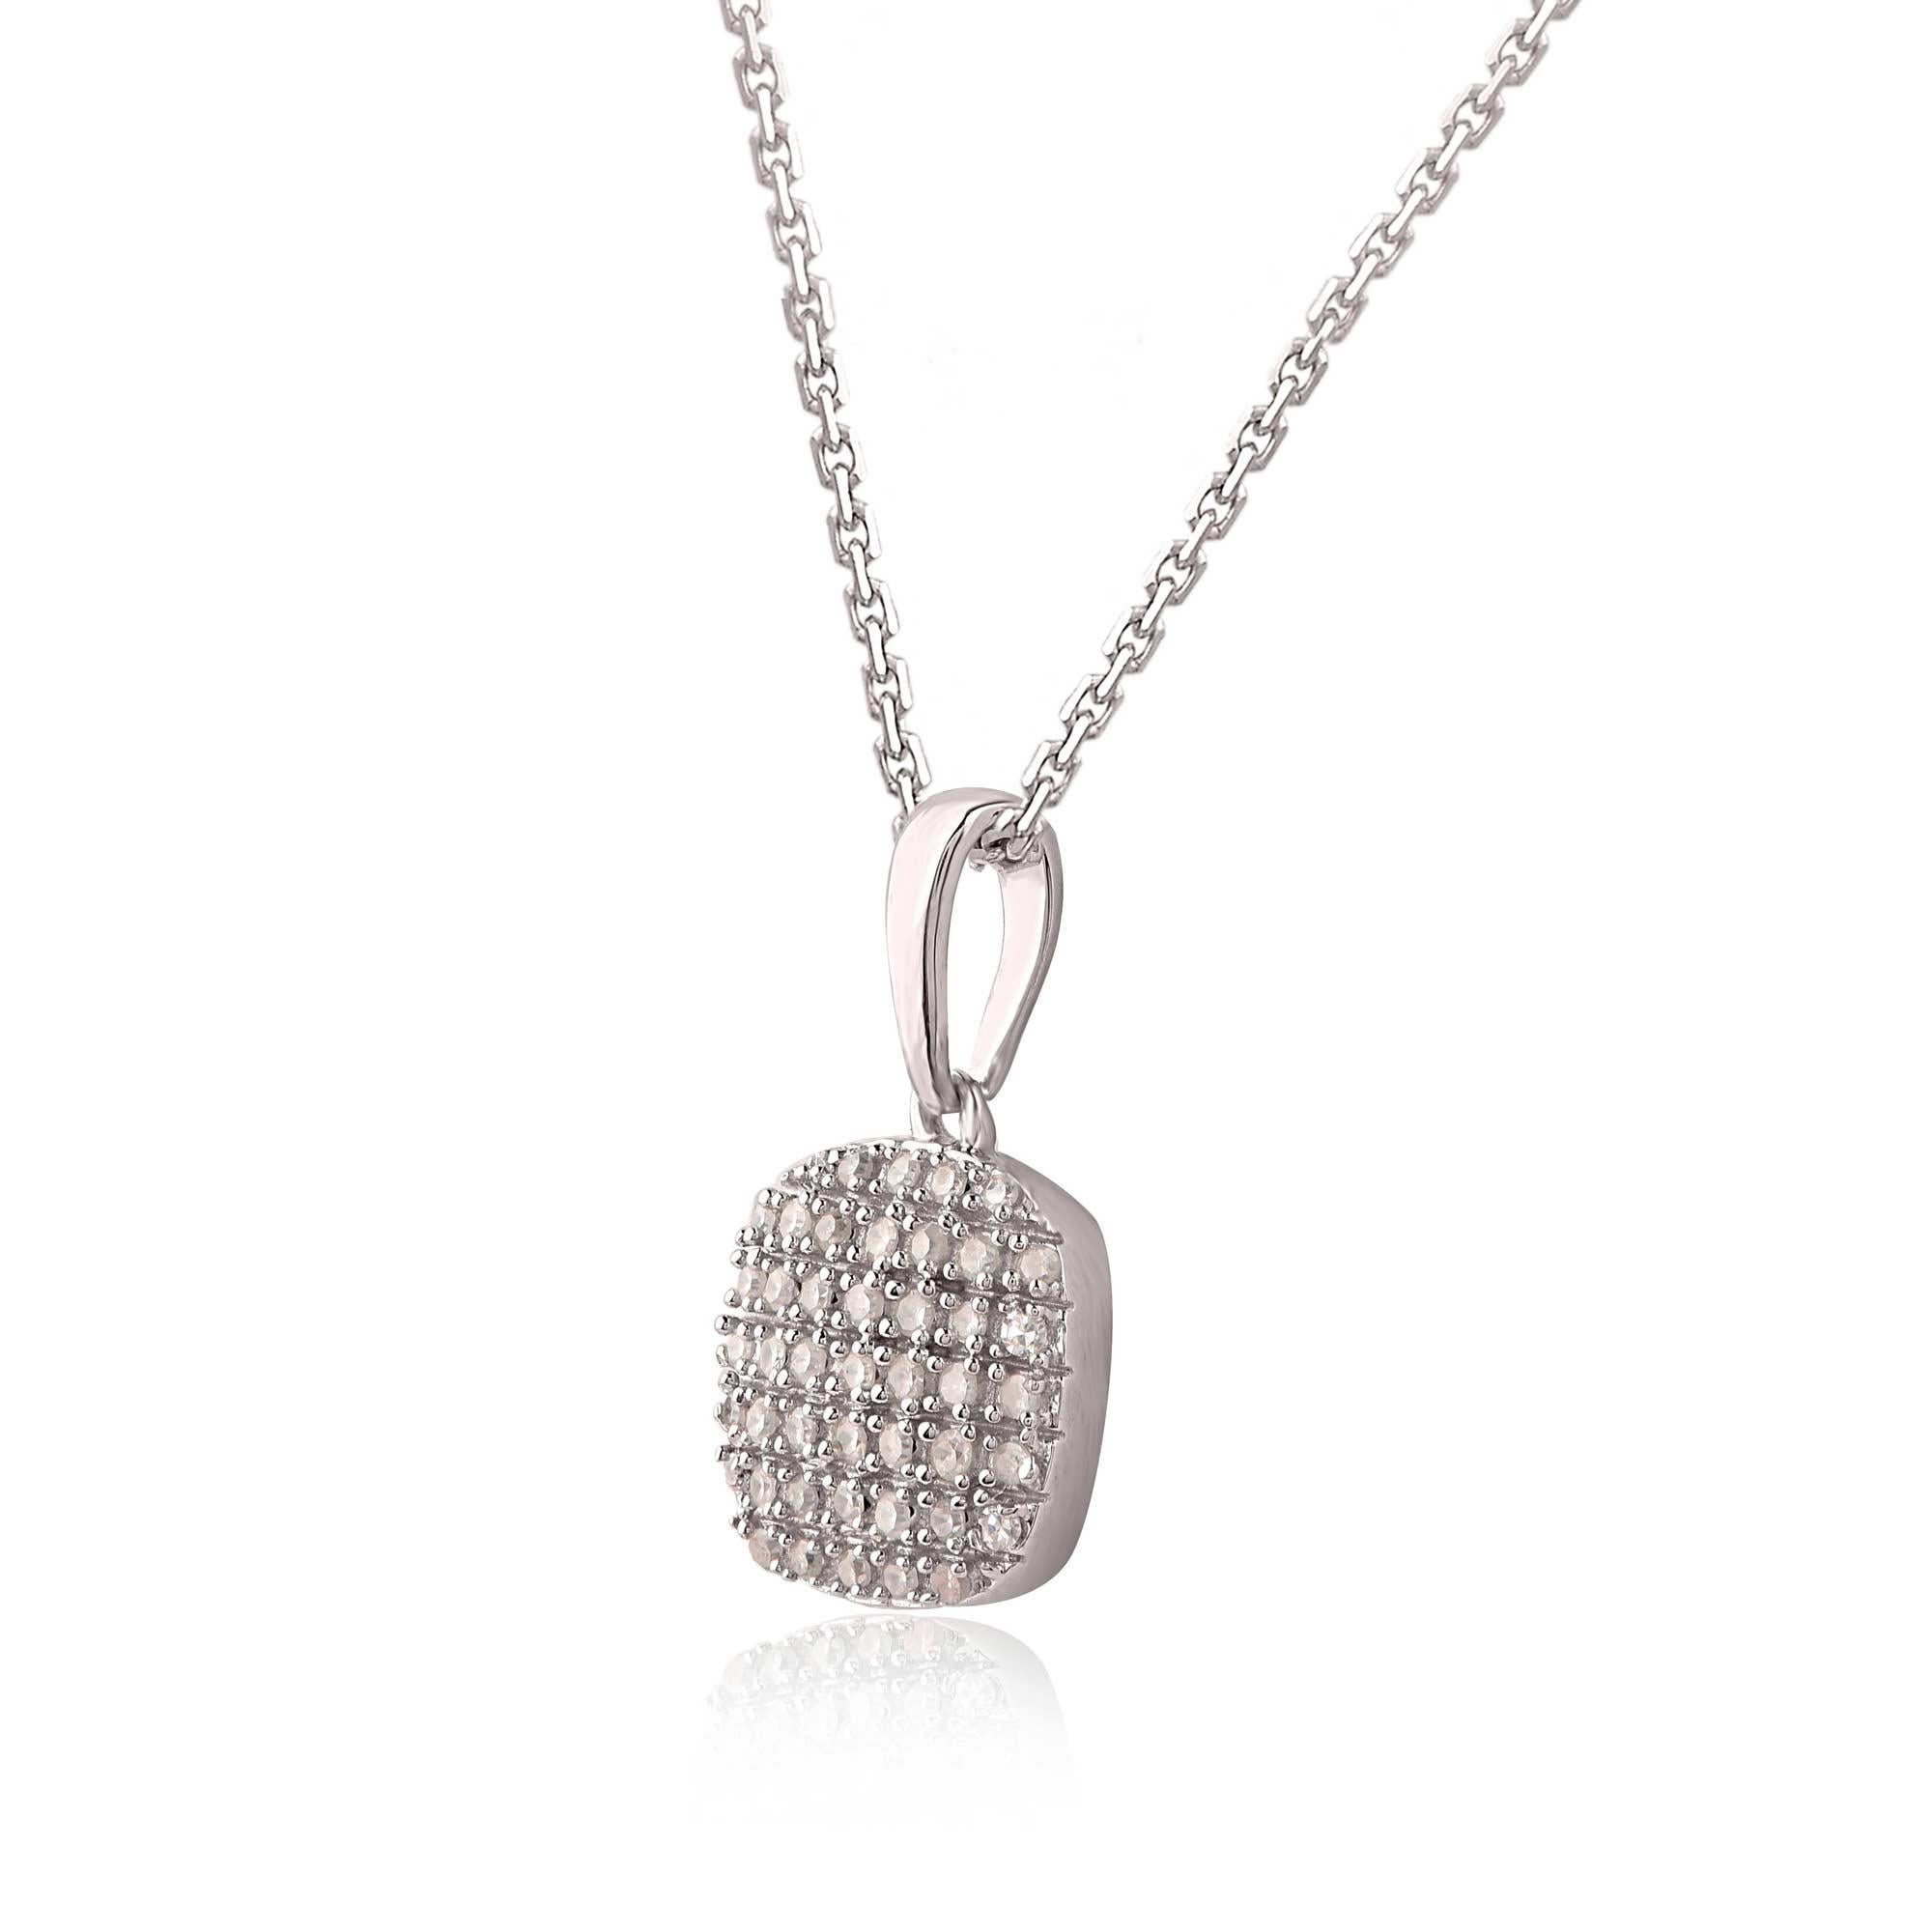 Make any day special with this gorgeous diamond pendant. This pendant is crafted from 14-karat white gold and features 45 single cut diamonds set in prong setting. H-I color I2 clarity and a high polish finish complete the brilliant sophistication